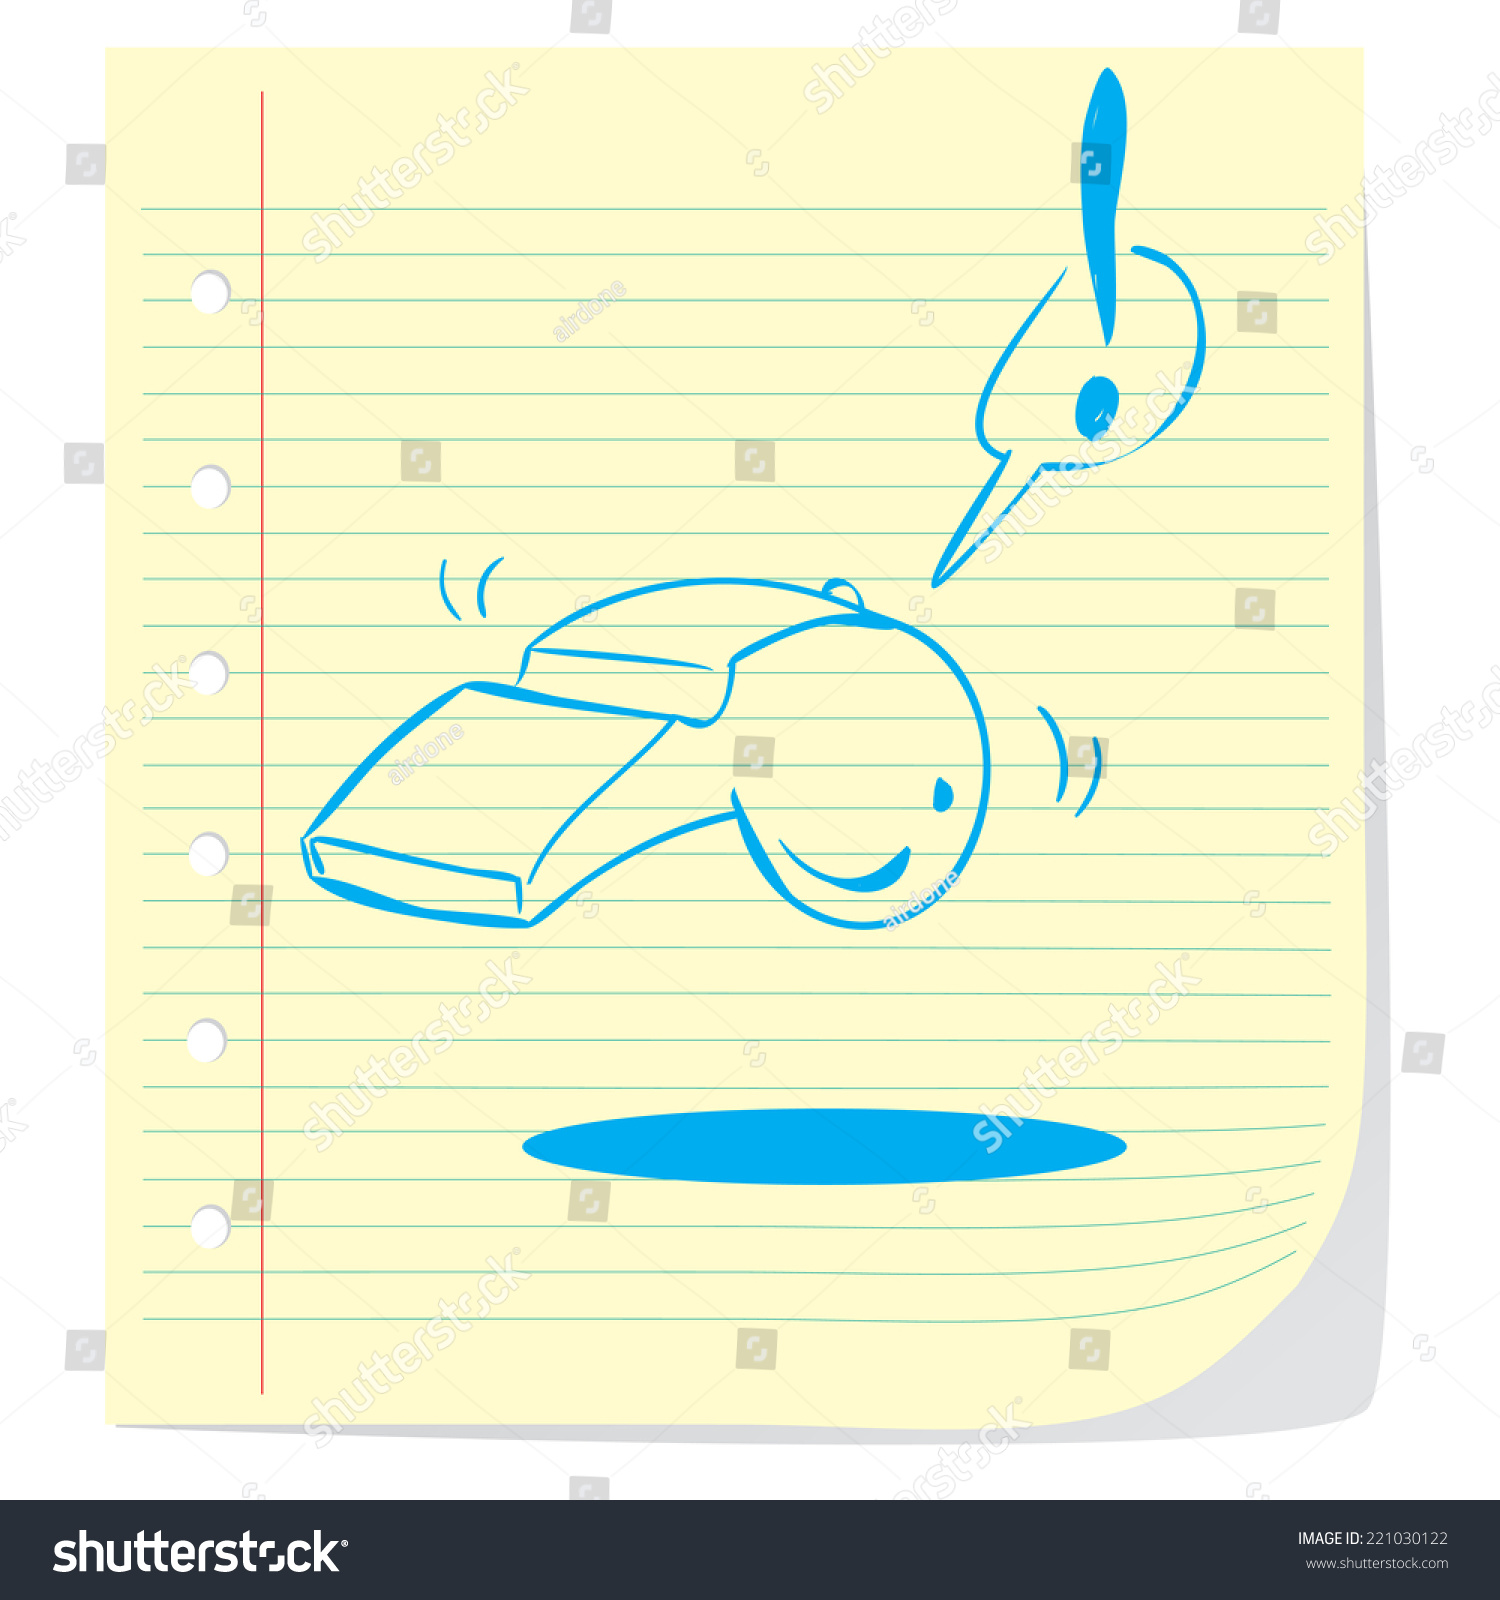 Vector Illustration Of Whistle In Doodle Style - 221030122 : Shutterstock